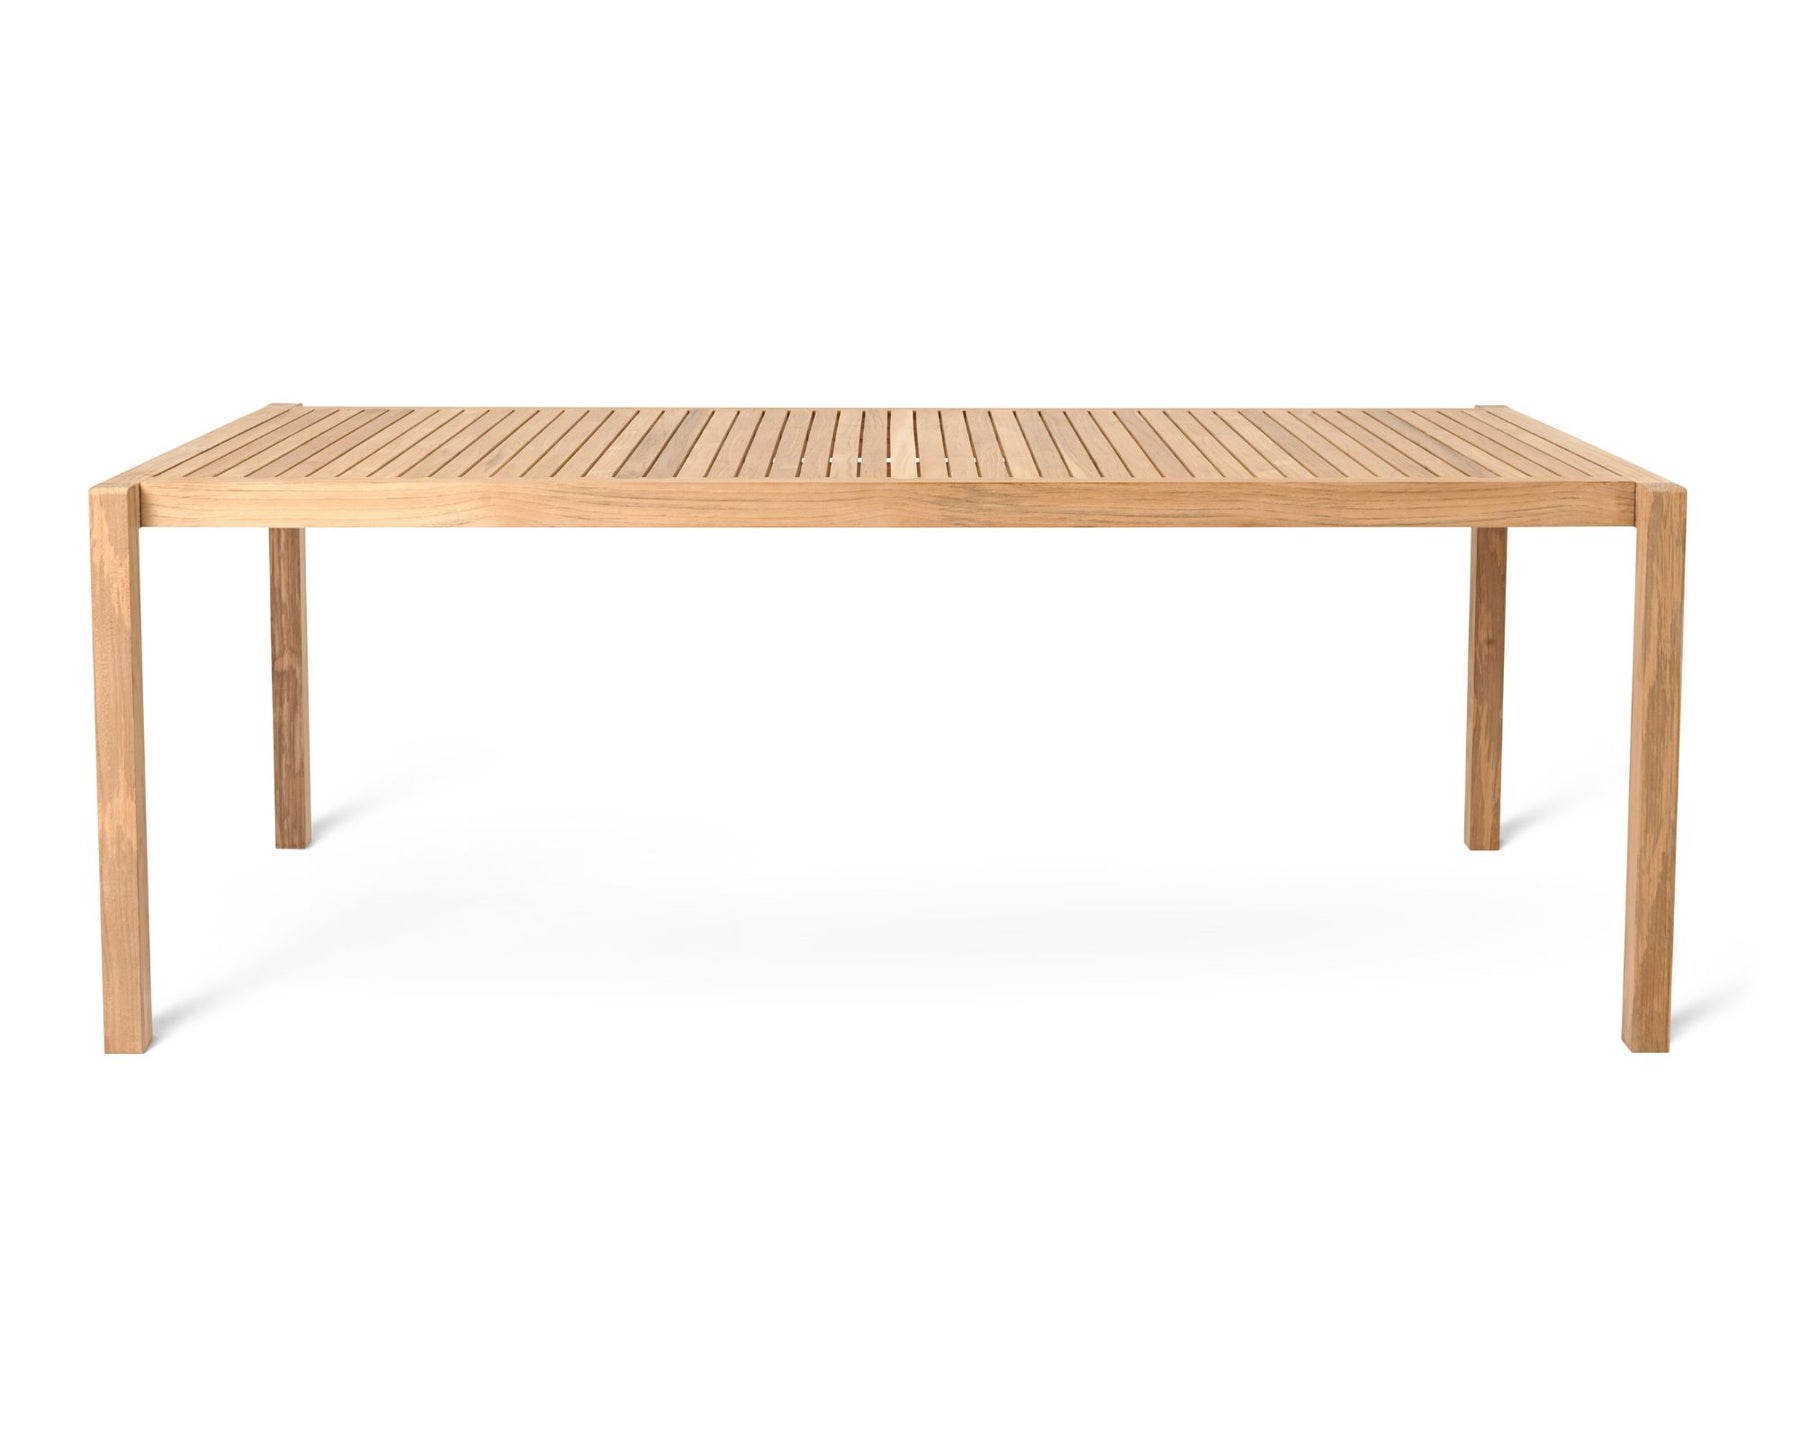 AH901 Outdoor Dining Table | DSHOP